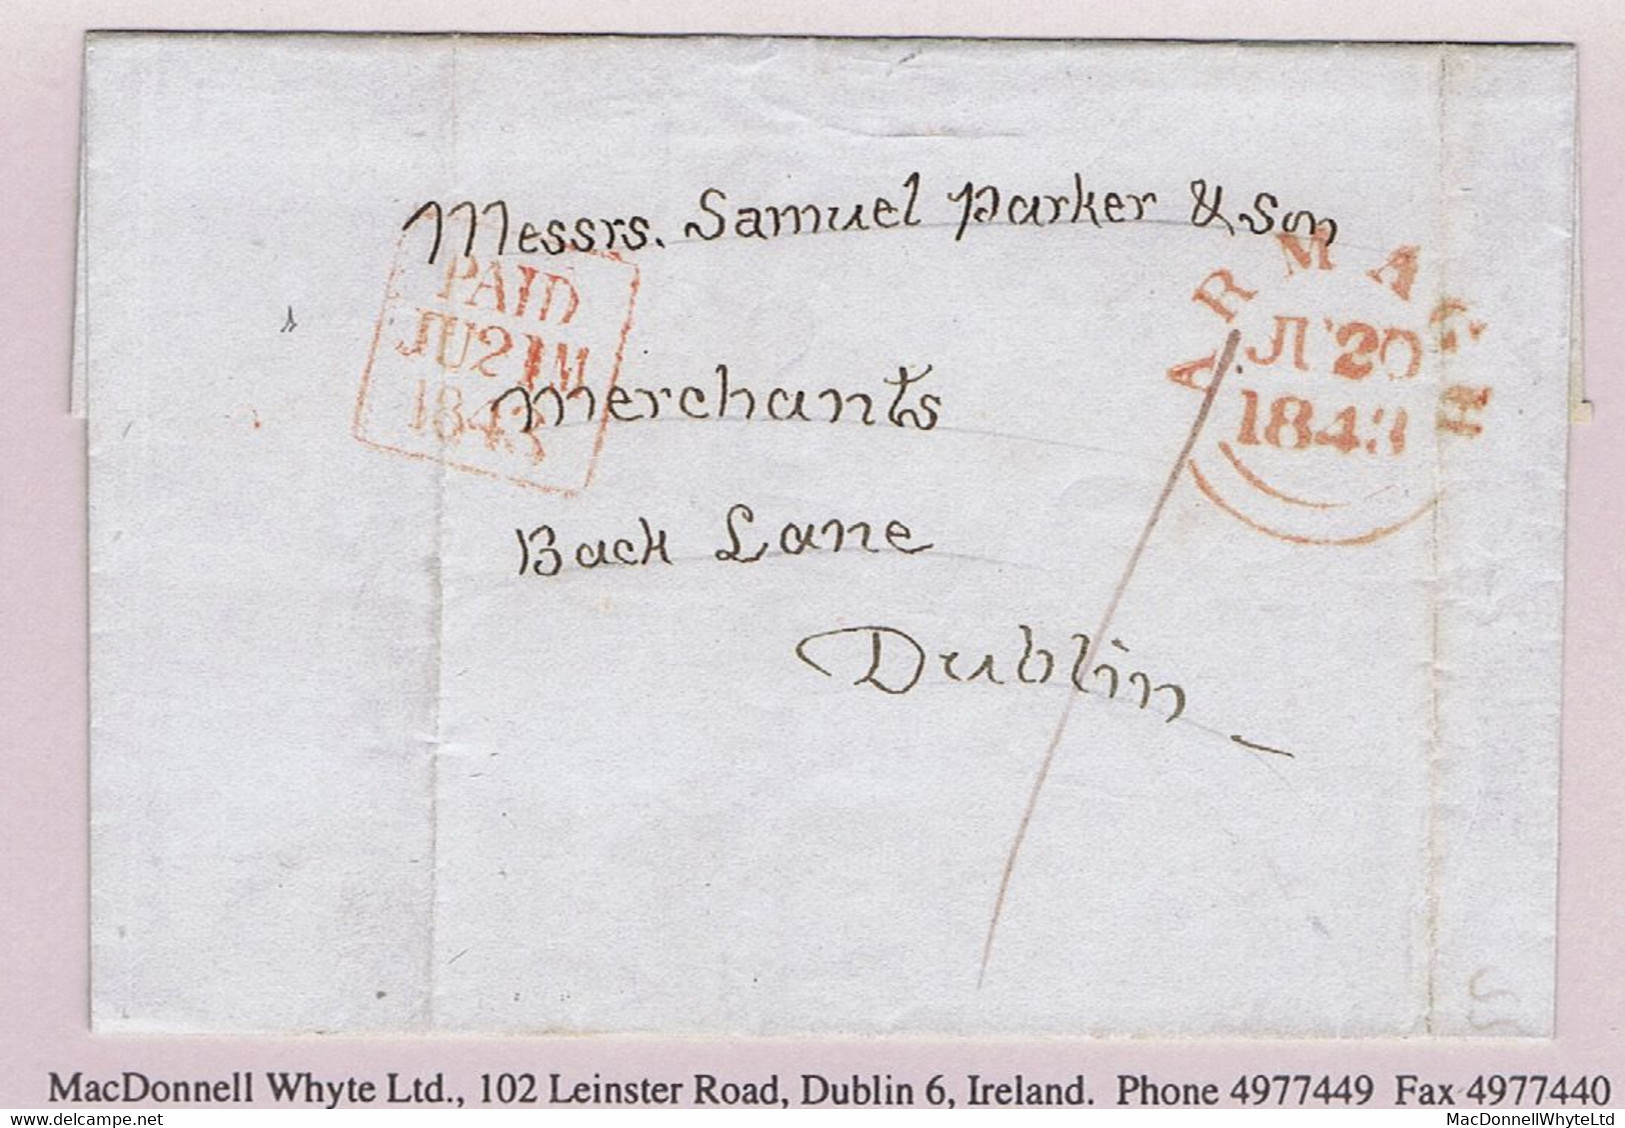 Ireland Armagh Uniform Penny Post 1844 Cover Maguiresbridge To Dublin Prepaid "1" With ARMAGH JU 20 1843 Cds In Red - Prephilately